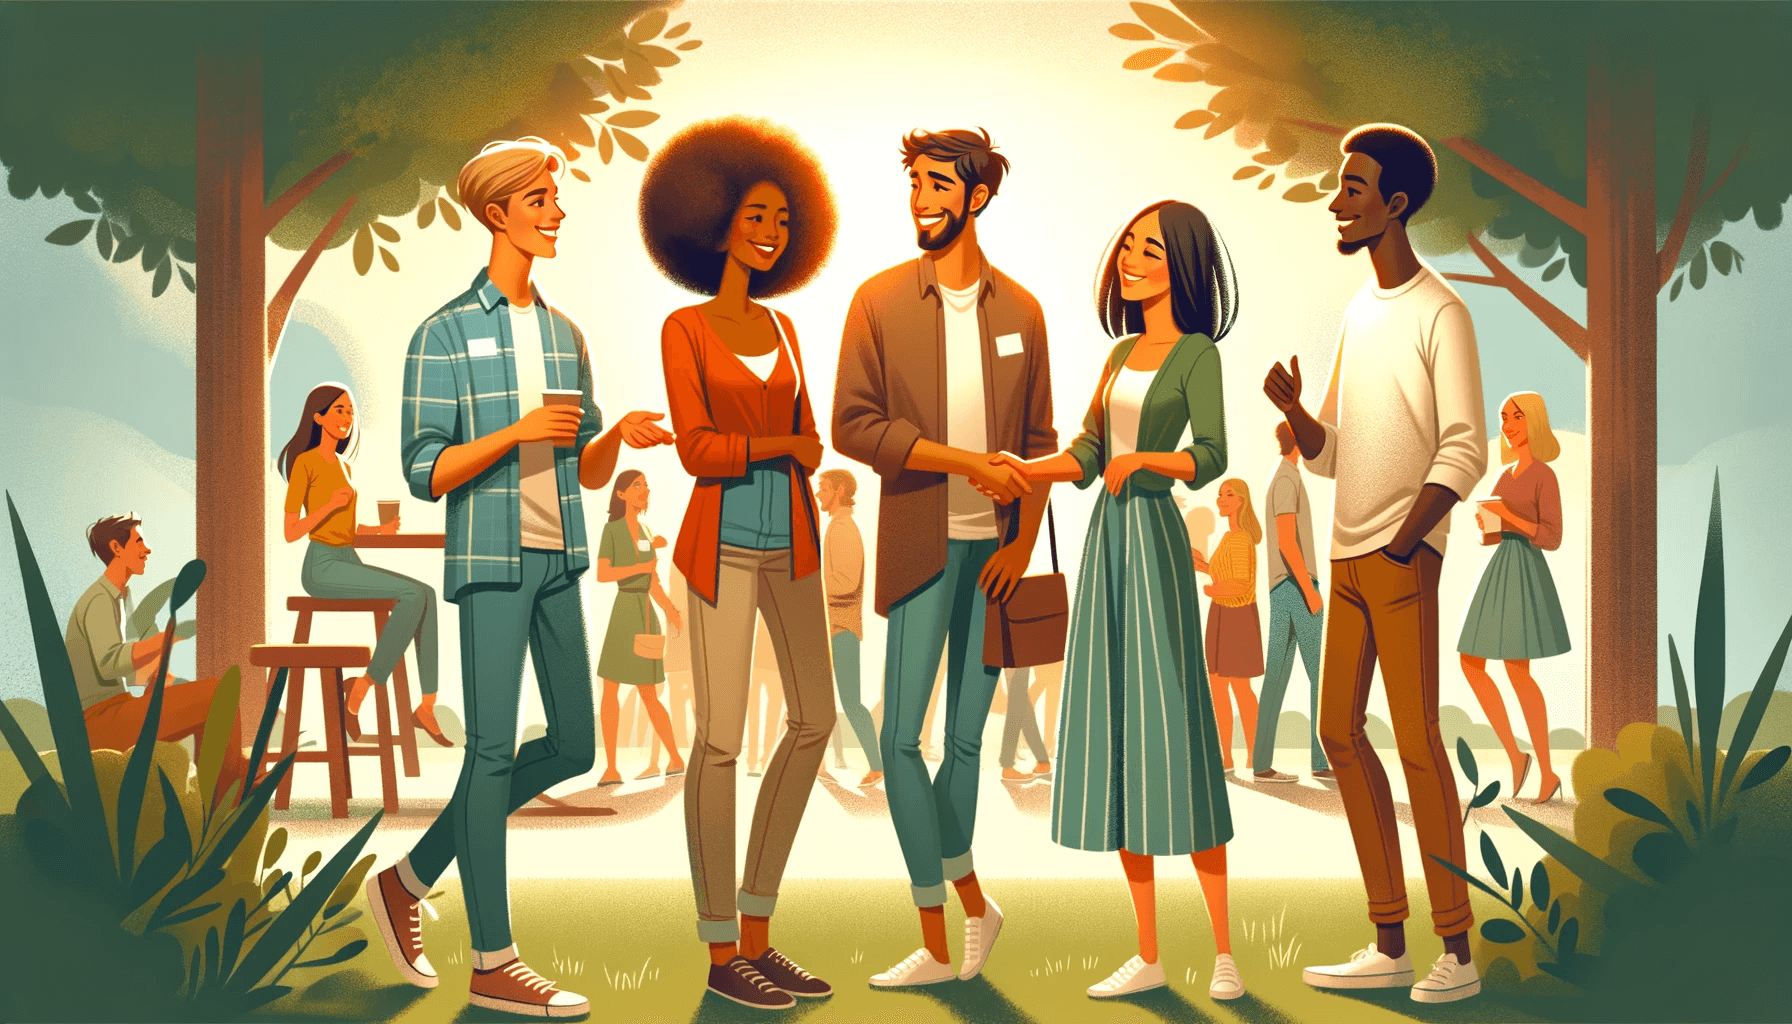 The Art of Making New Friends A Guide to Building Meaningful Connections